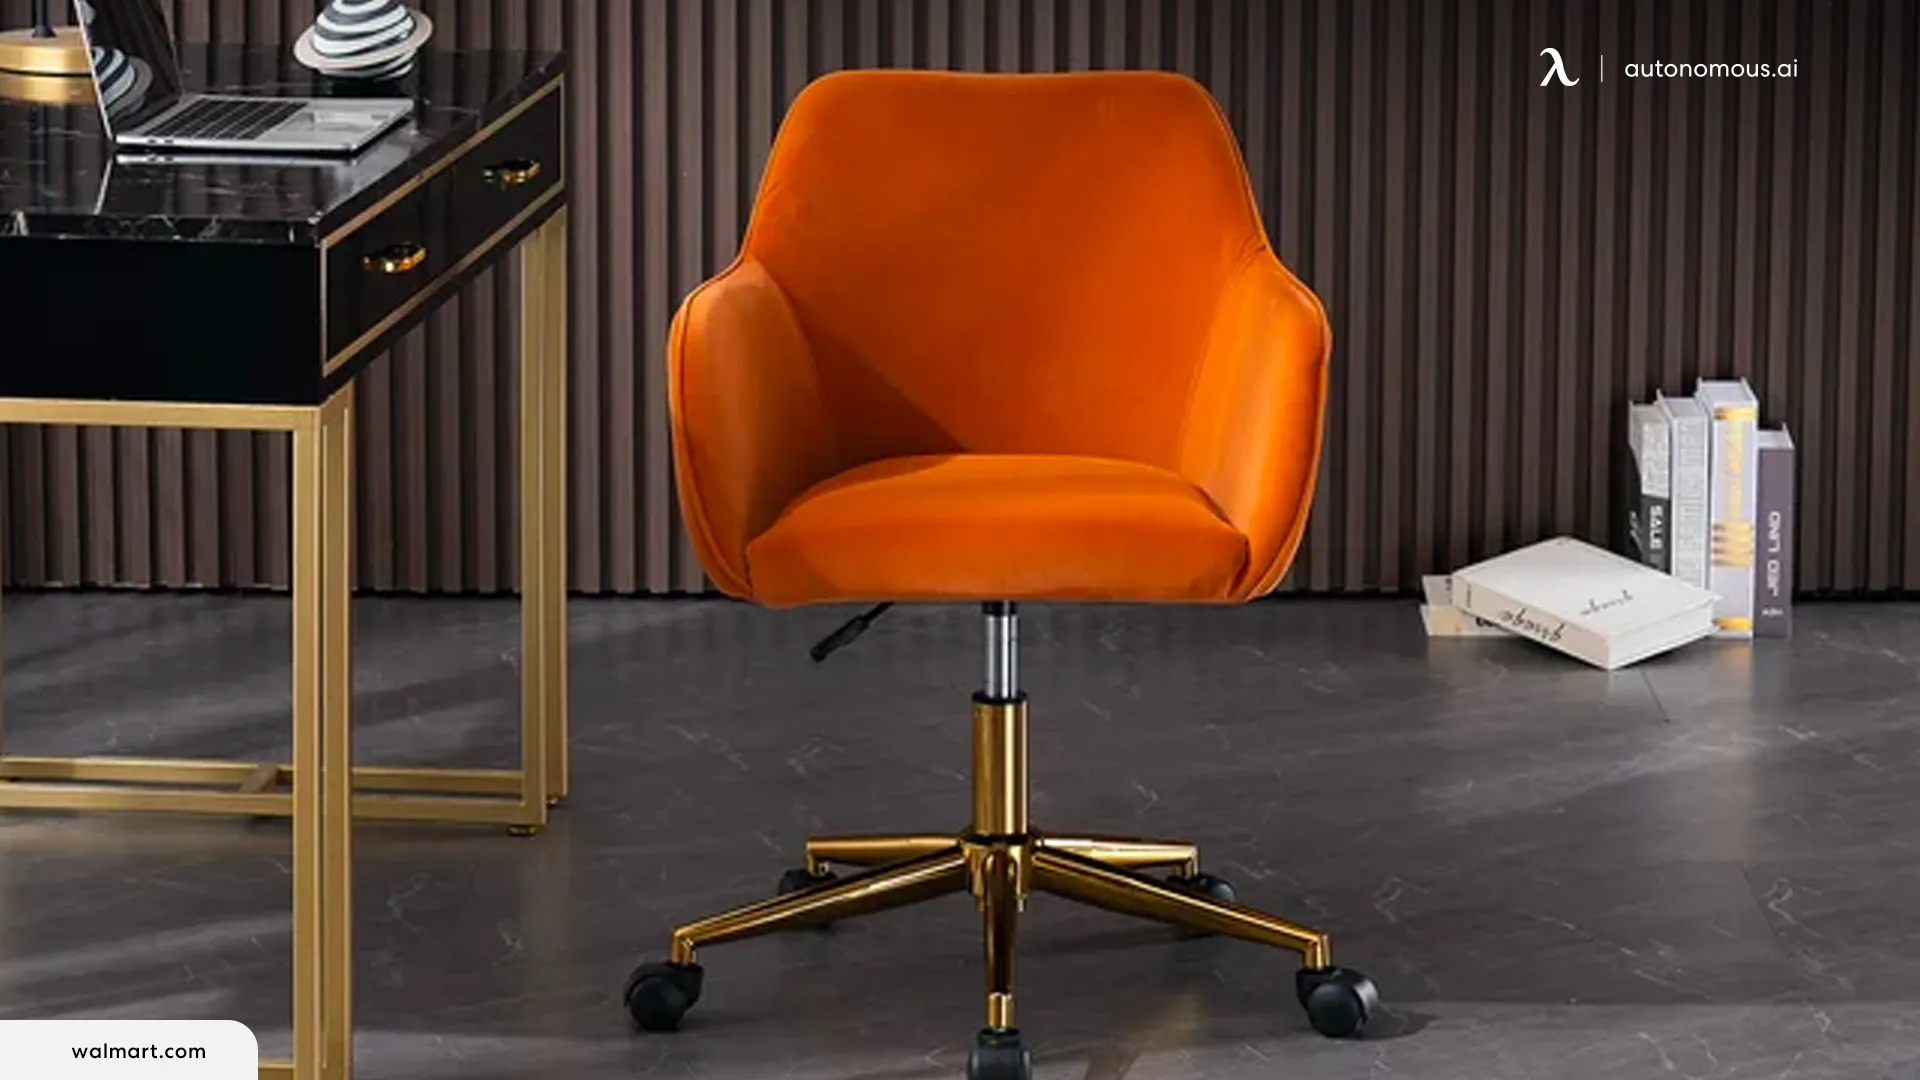 Spice Up Your Workspace with an Orange Office Chair